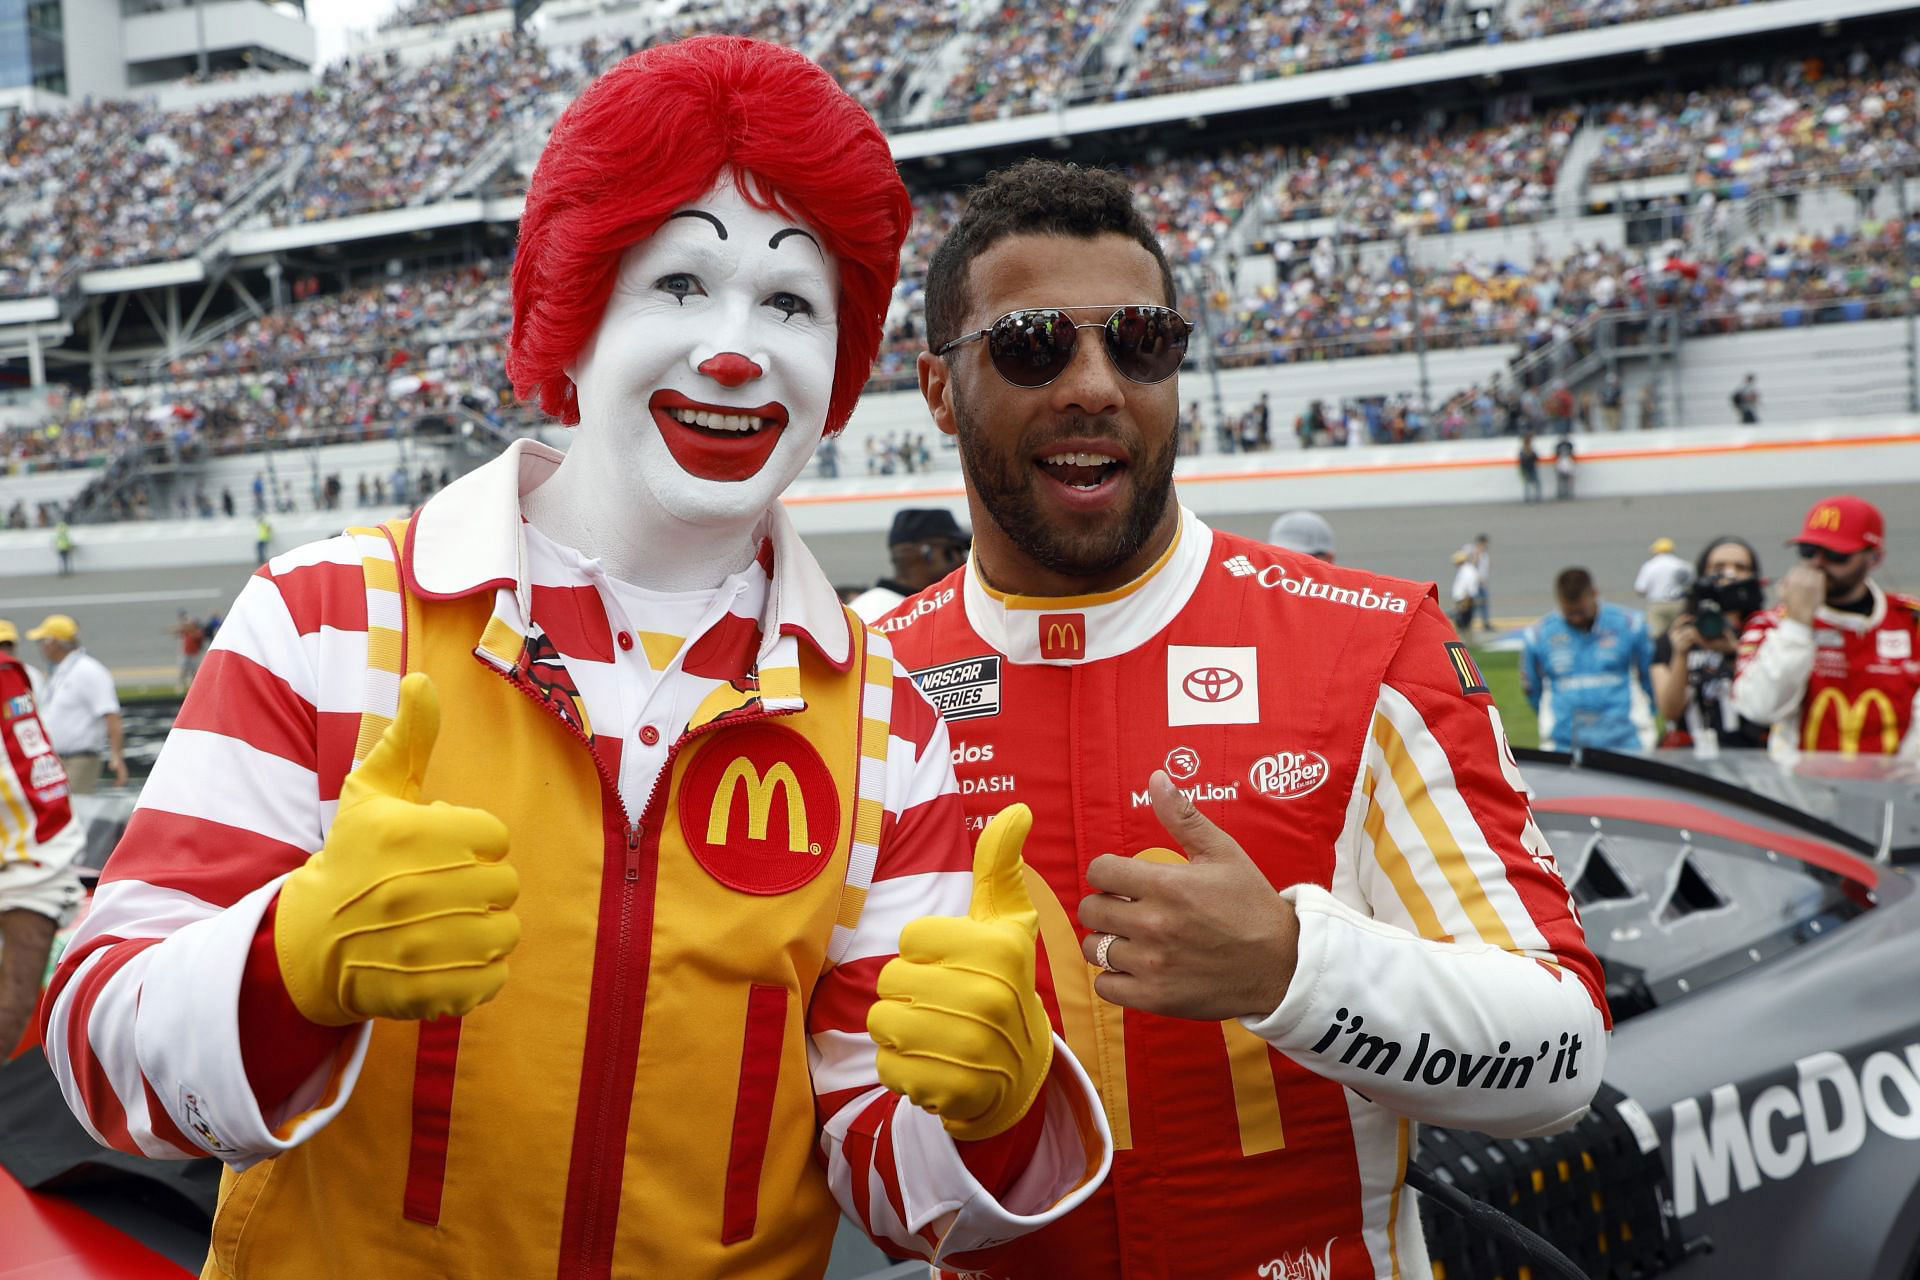 ‘Bubba Wallace meal' introduced by sponsors McDonald's ahead of Chicago